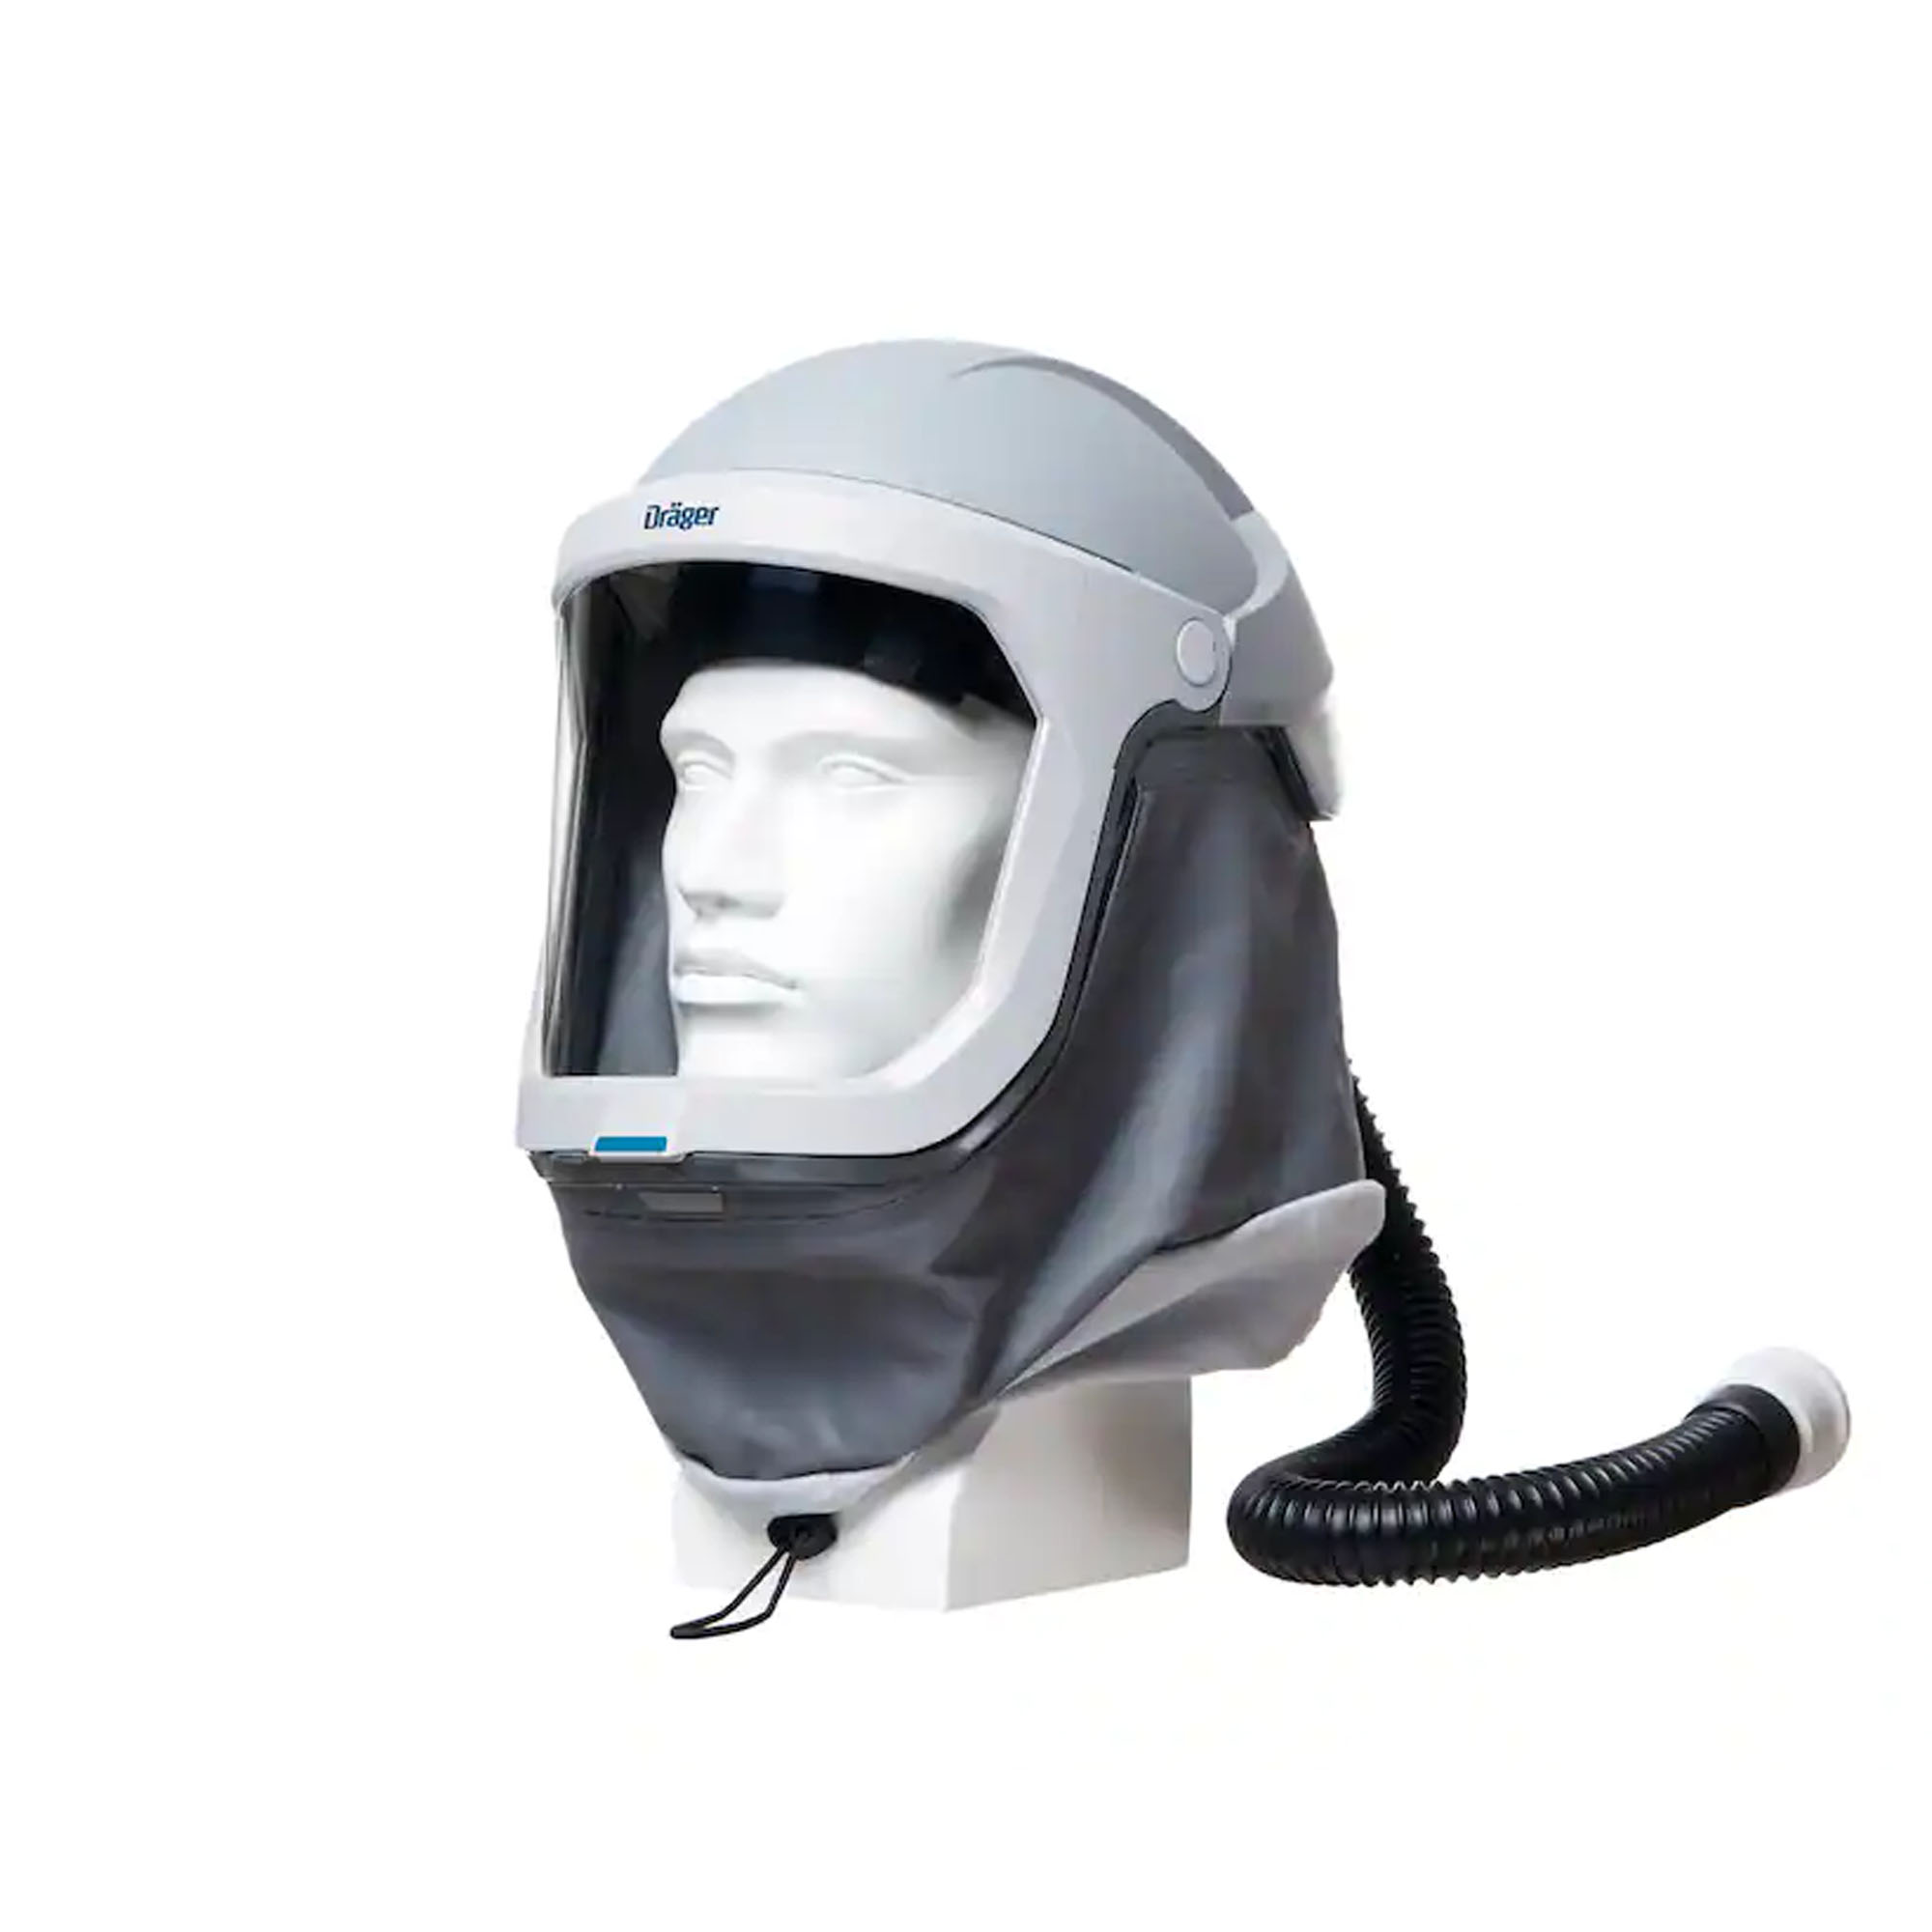 Dräger headpieces for PAPR and airline